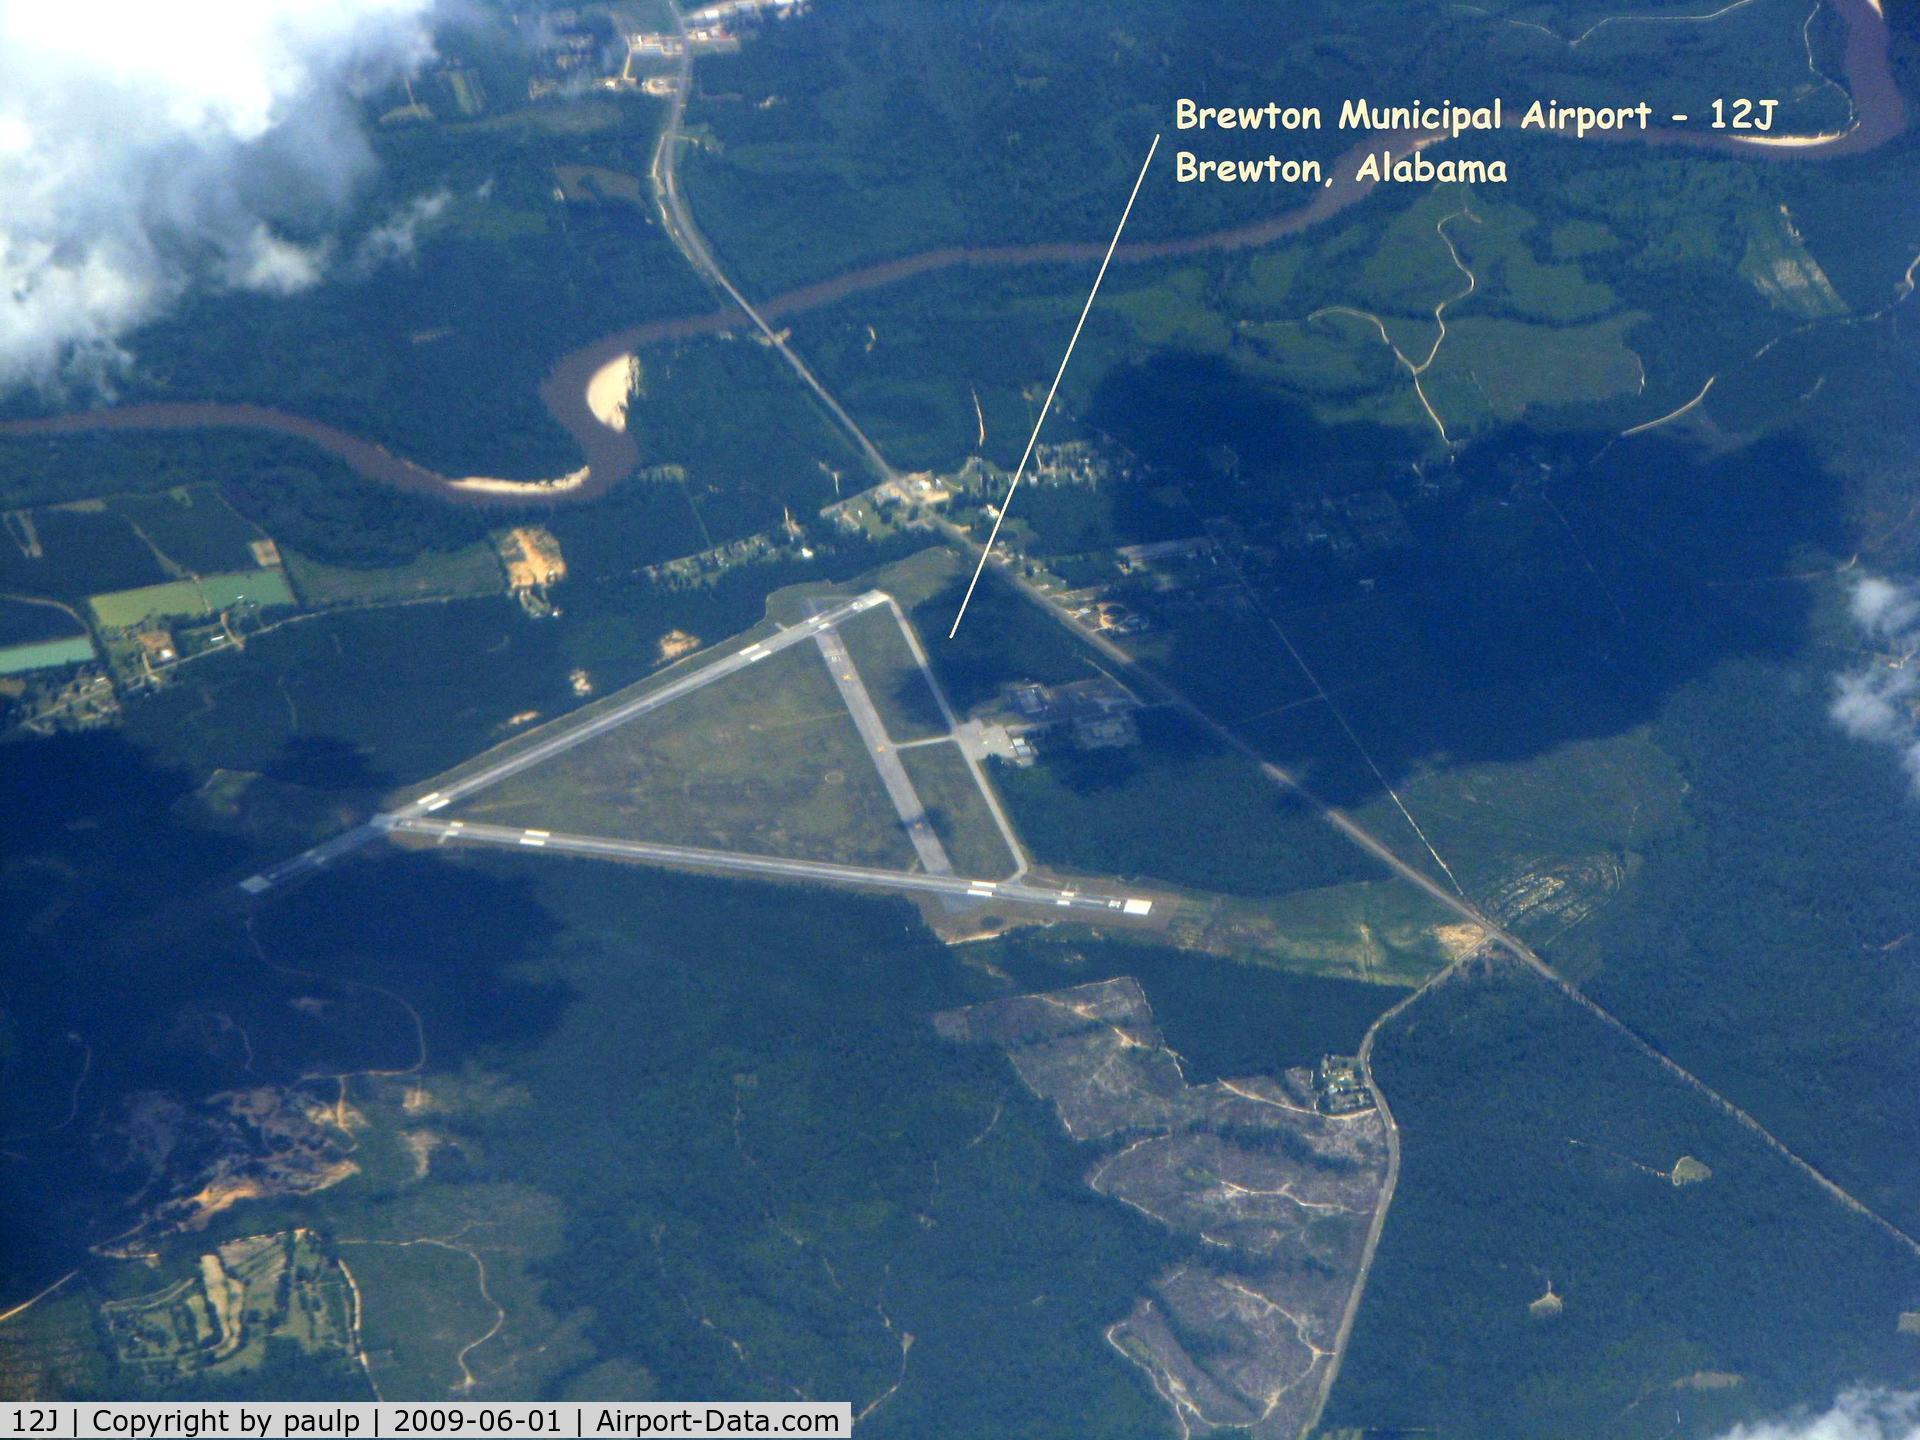 Brewton Municipal Airport (12J) - On the way to Orlando Sanford from Shreveport Regional.